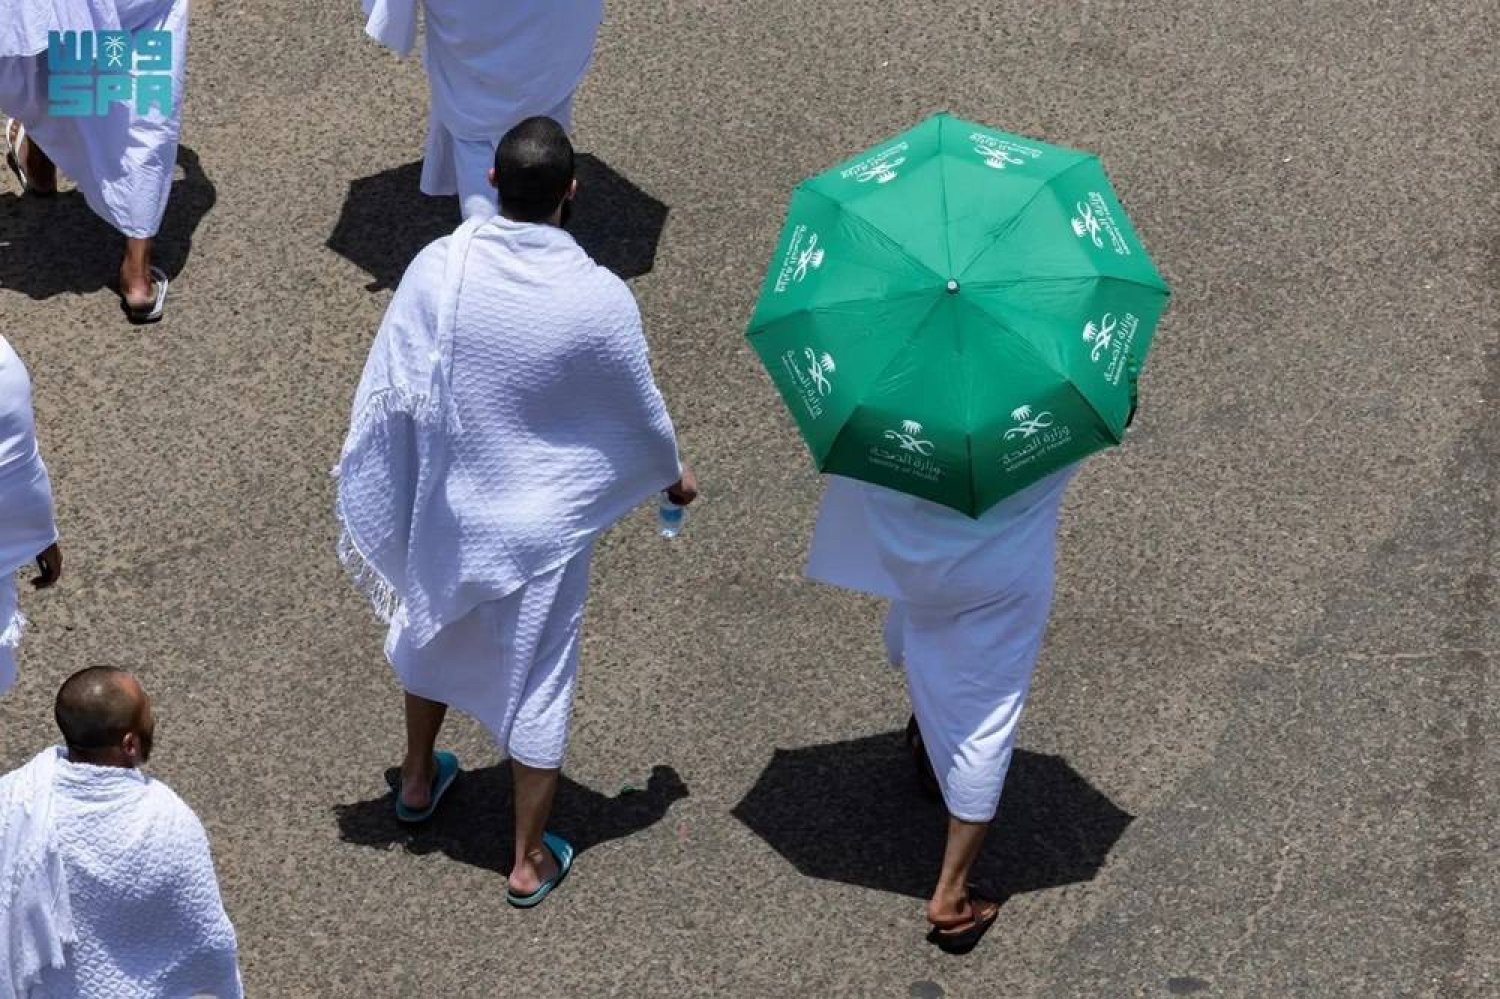 Saudi Arabia’s Ministry of Health emphasized on Friday the importance of using sun umbrellas to prevent sunstroke during the Hajj. (SPA)